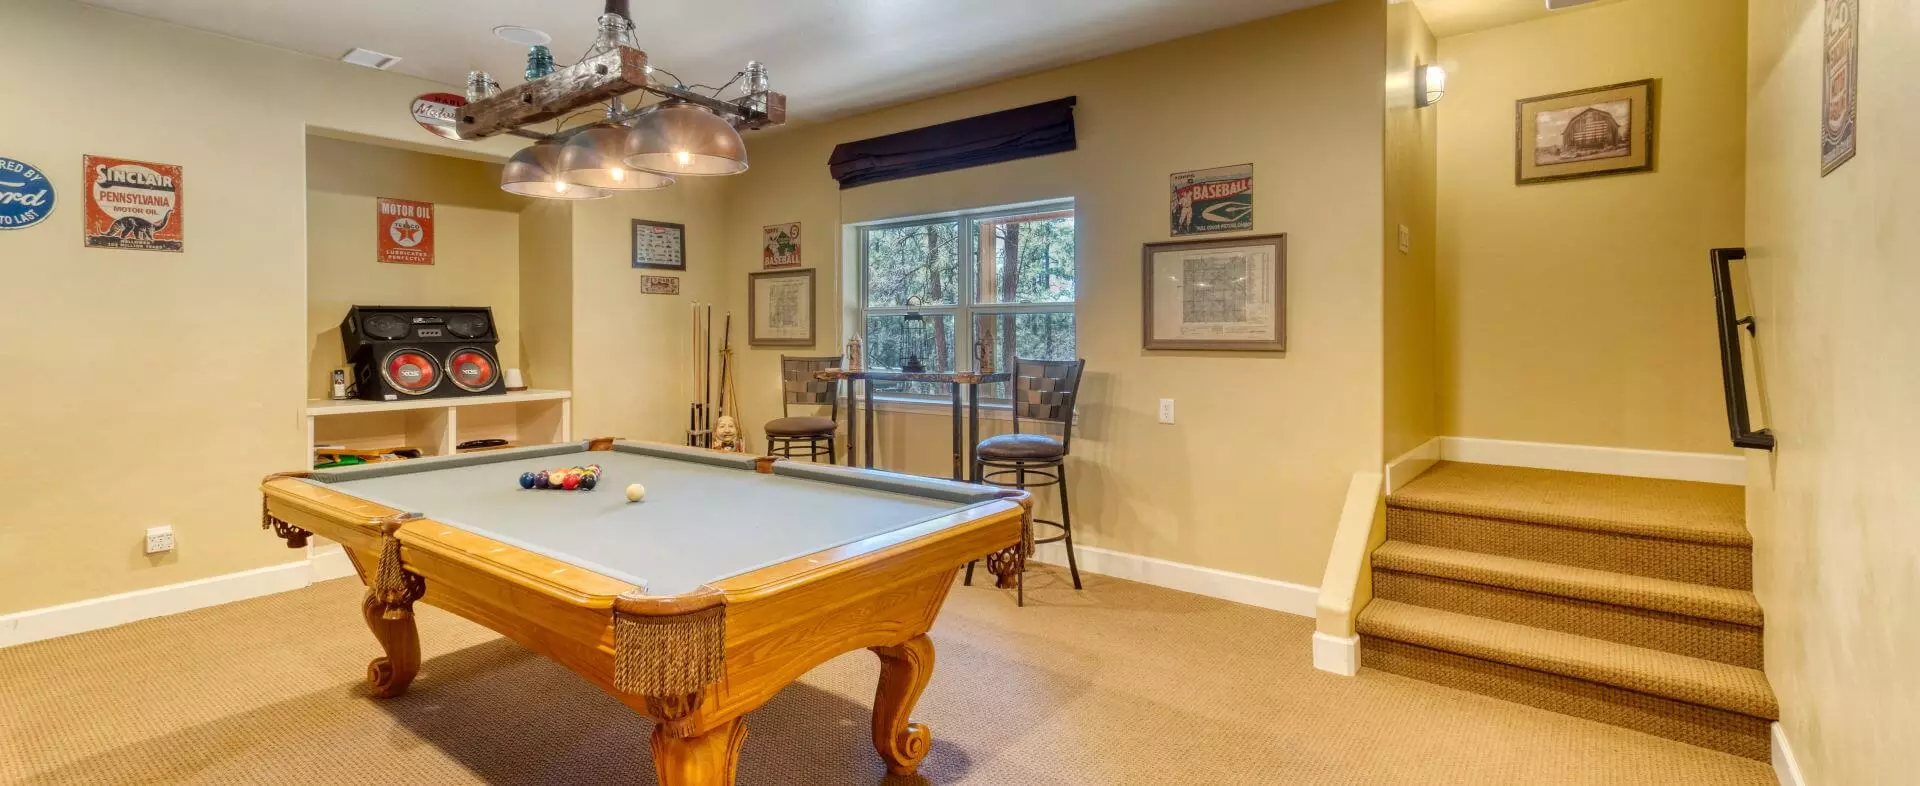 A finished basement with a billiards table